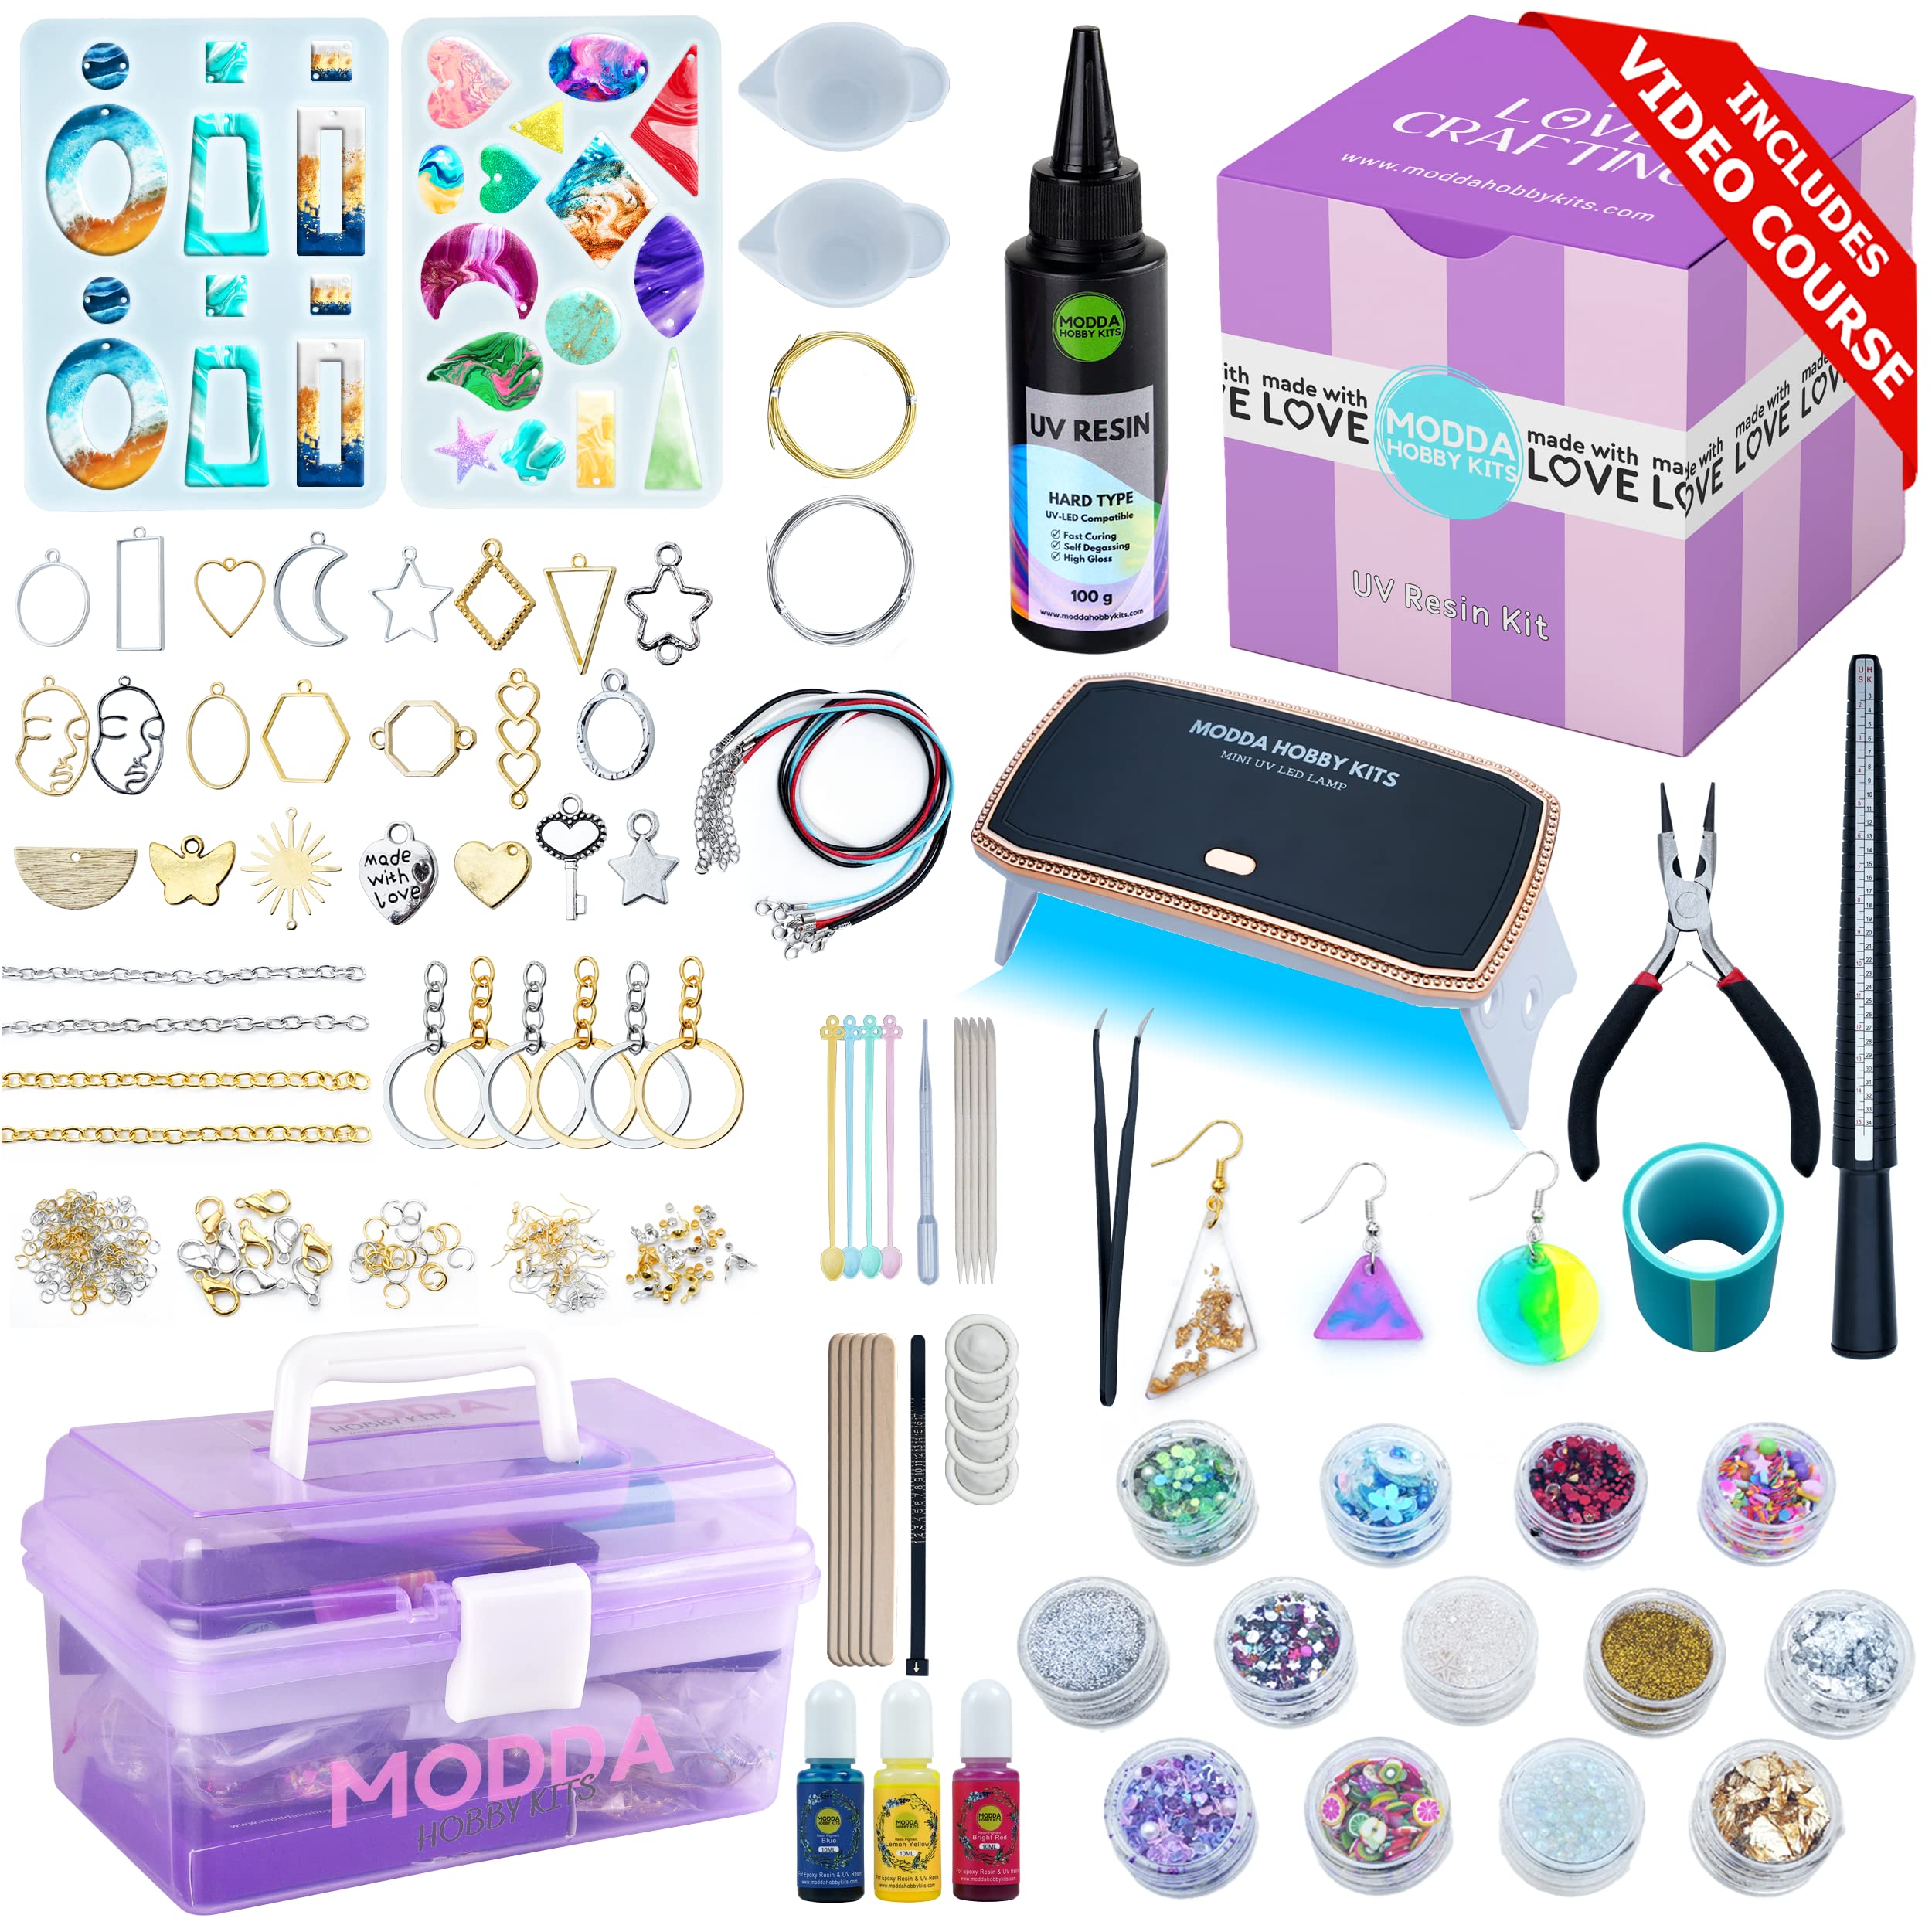  MODDA Jewelry Making Supplies - Jewelry Making Kits for Adults,  Teens, Girls, Beginners, Women - Includes Instructions, Tools, Beads,  Charms for Necklace, Earring, Bracelet Making Kit - Purple Set